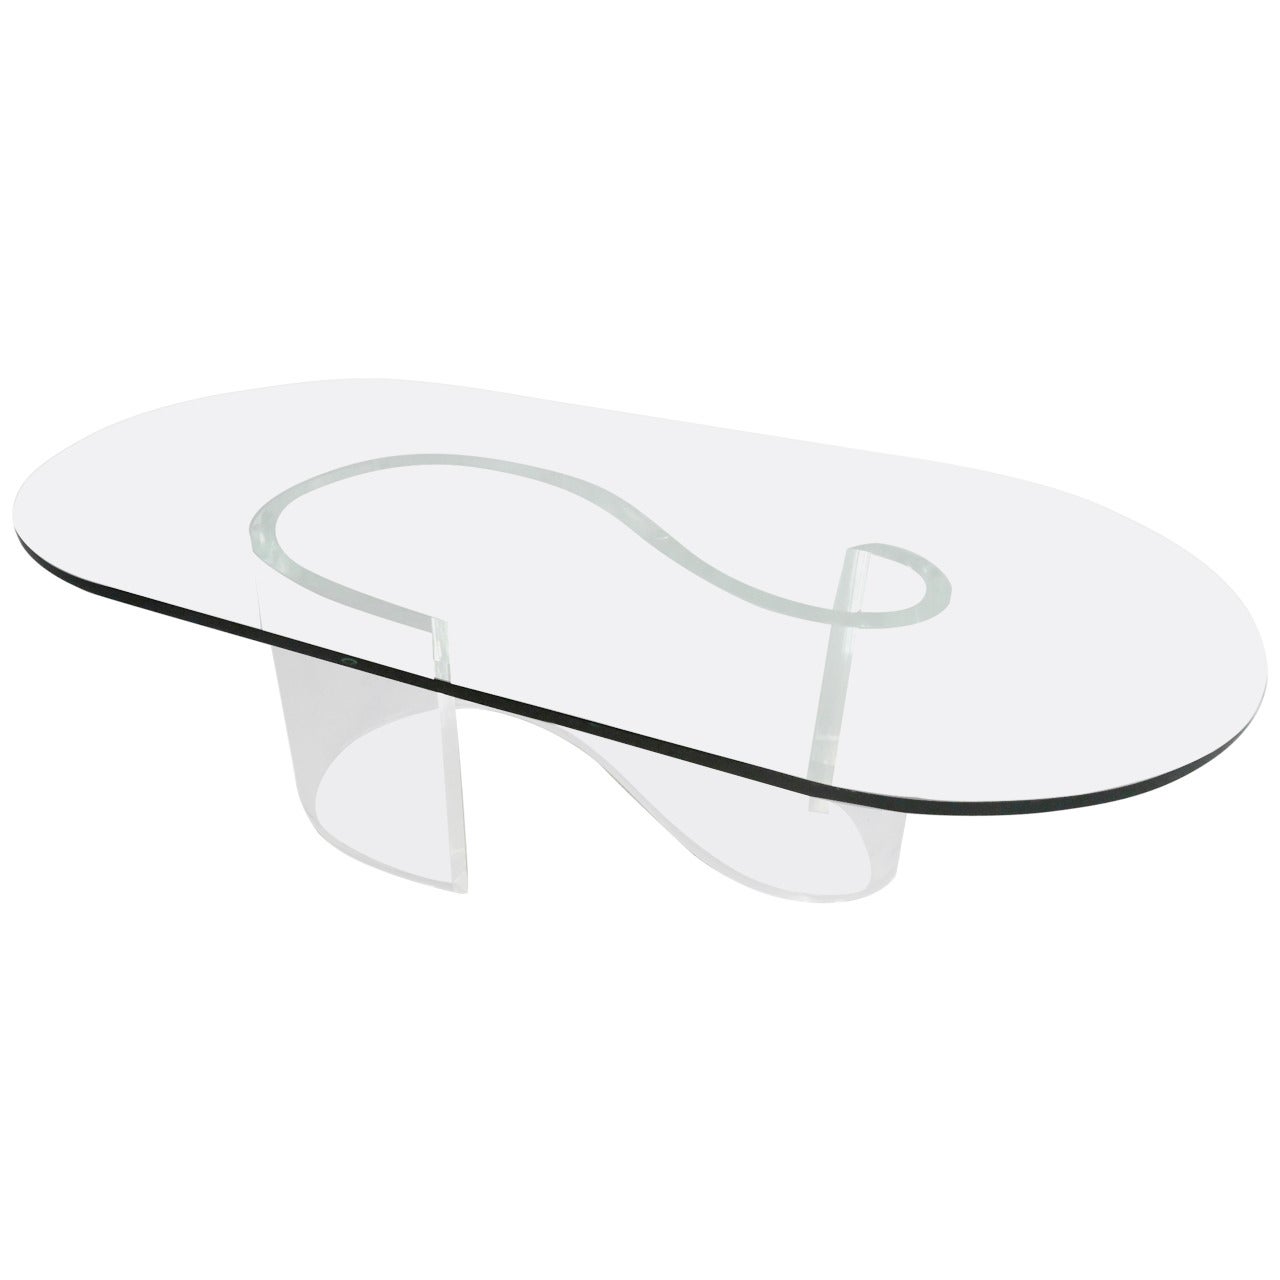 Mid-Century Modern Lucite Coffee Table